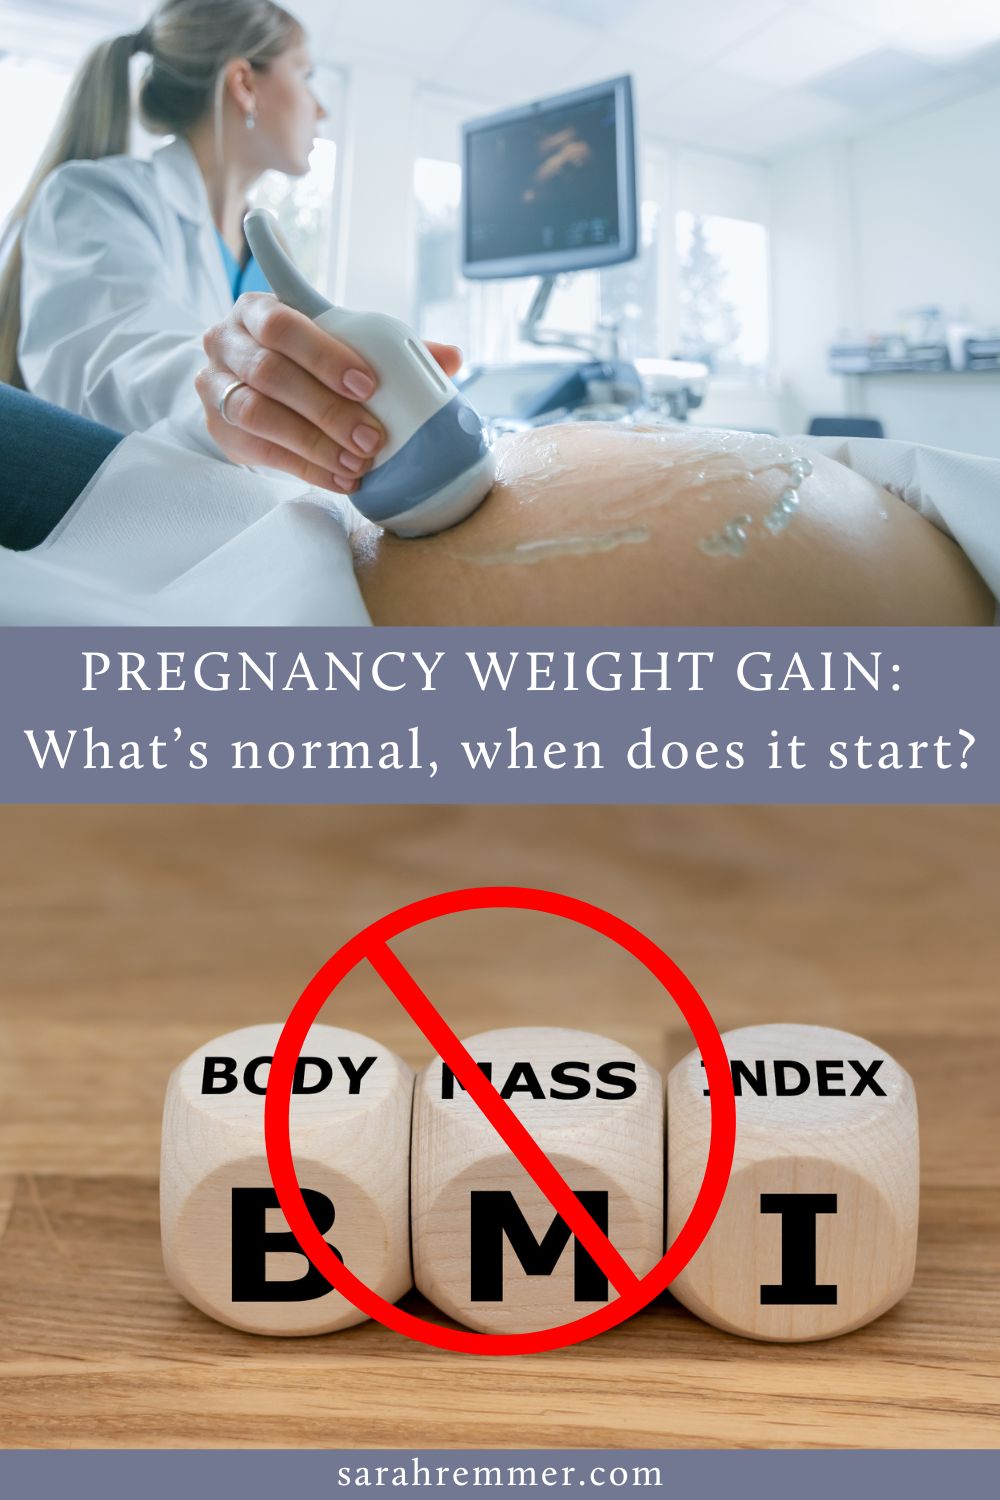 Pregnancy weight gain—what’s normal and when does it start? If you’re worried that you've gained too much weight during pregnancy read this.